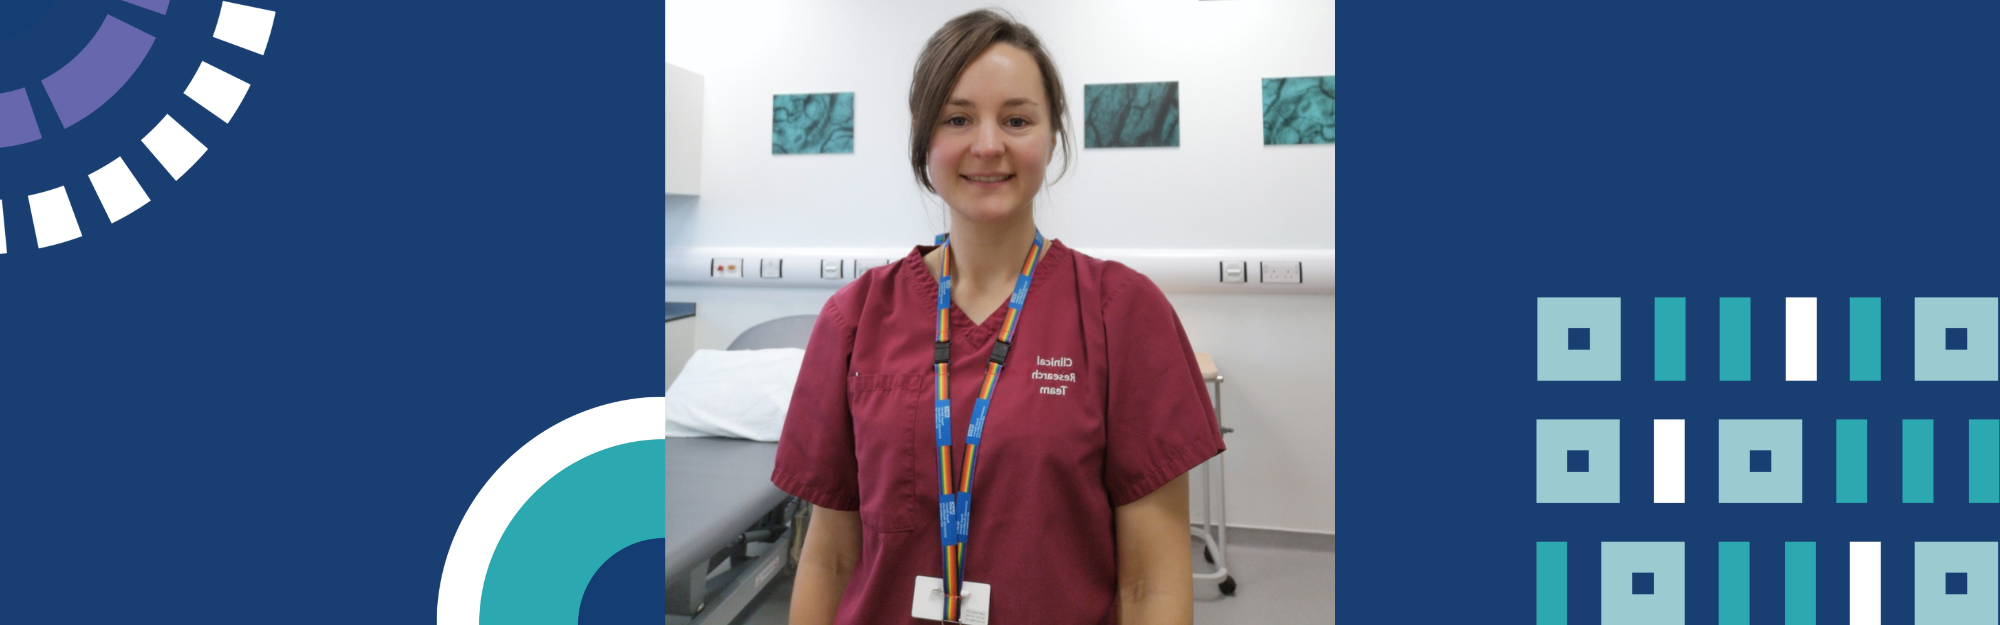 Sophie Whiteley, Registered Clinical Research Practitioner, and Cystic Fibrosis Trials Coordinator at the Royal Devon University Healthcare NHS Trust.